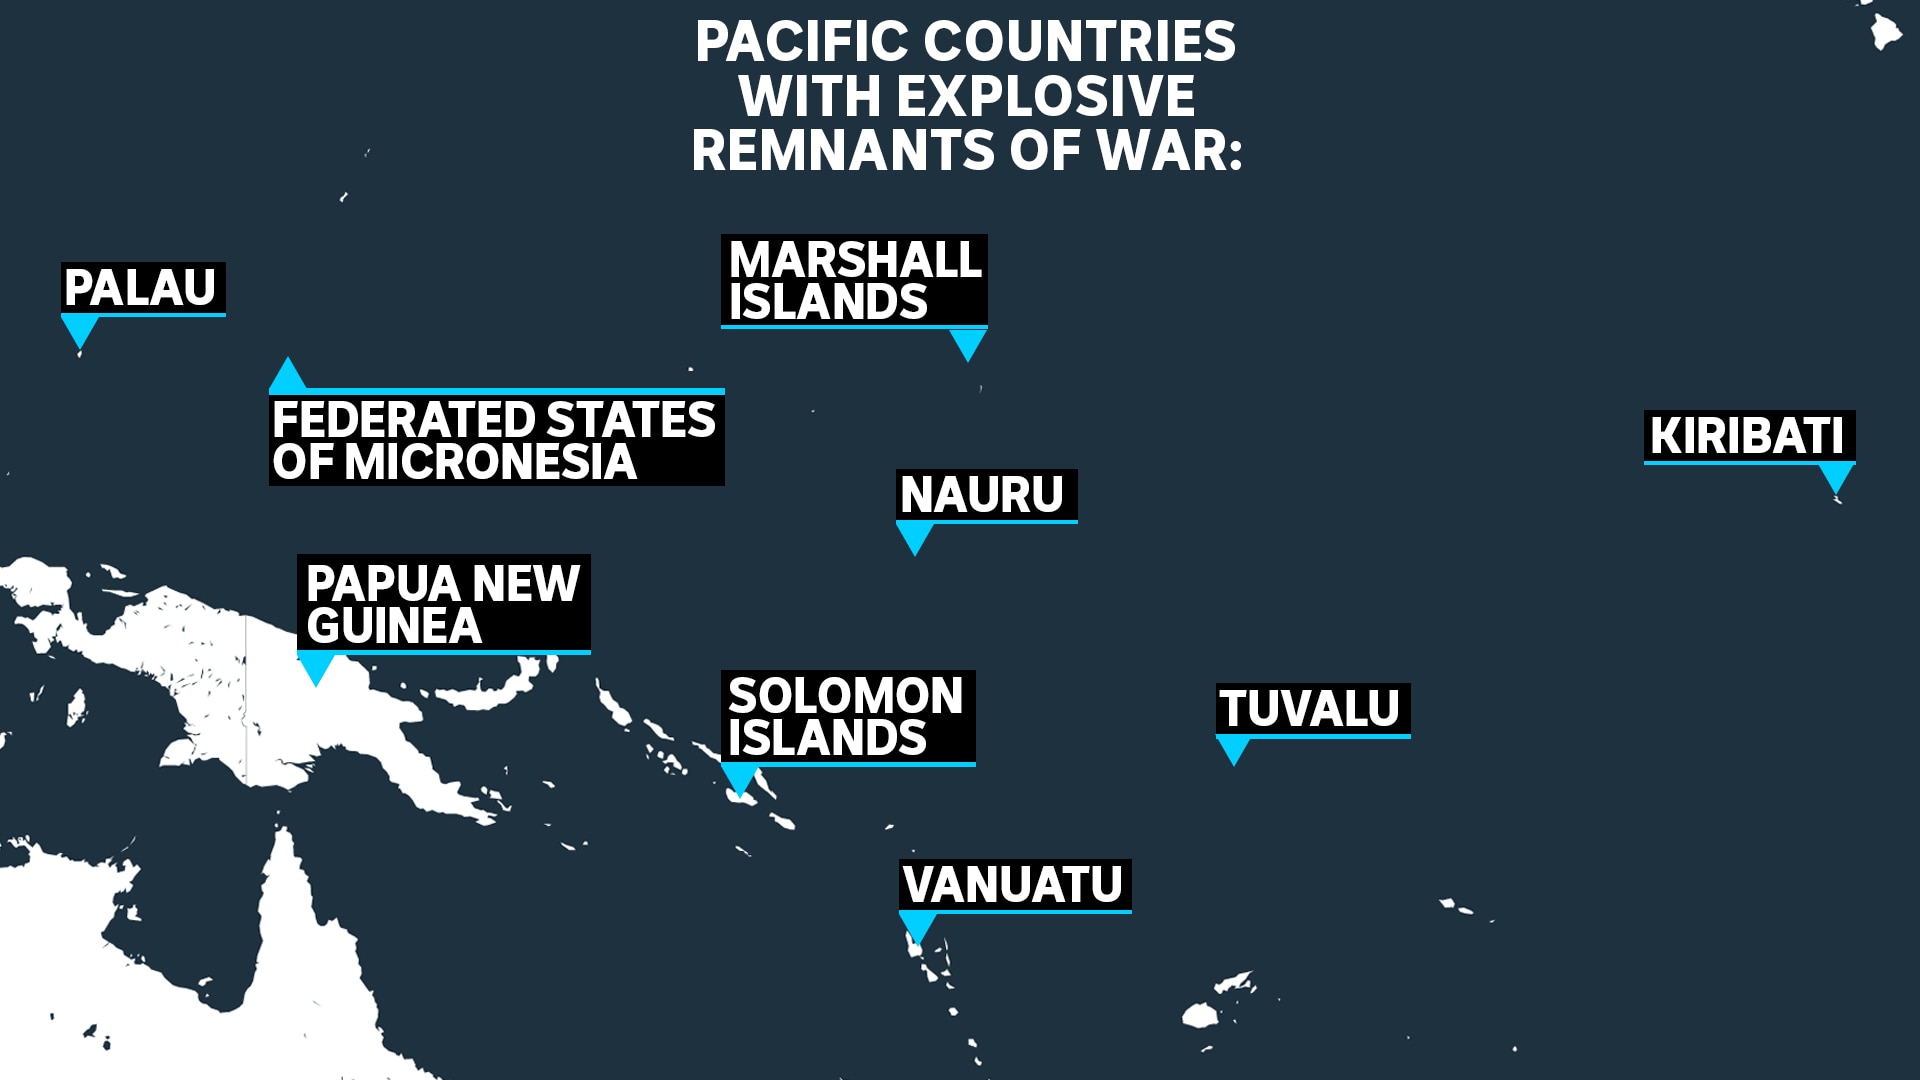 Map of Pacific countries with explosive remnants of war